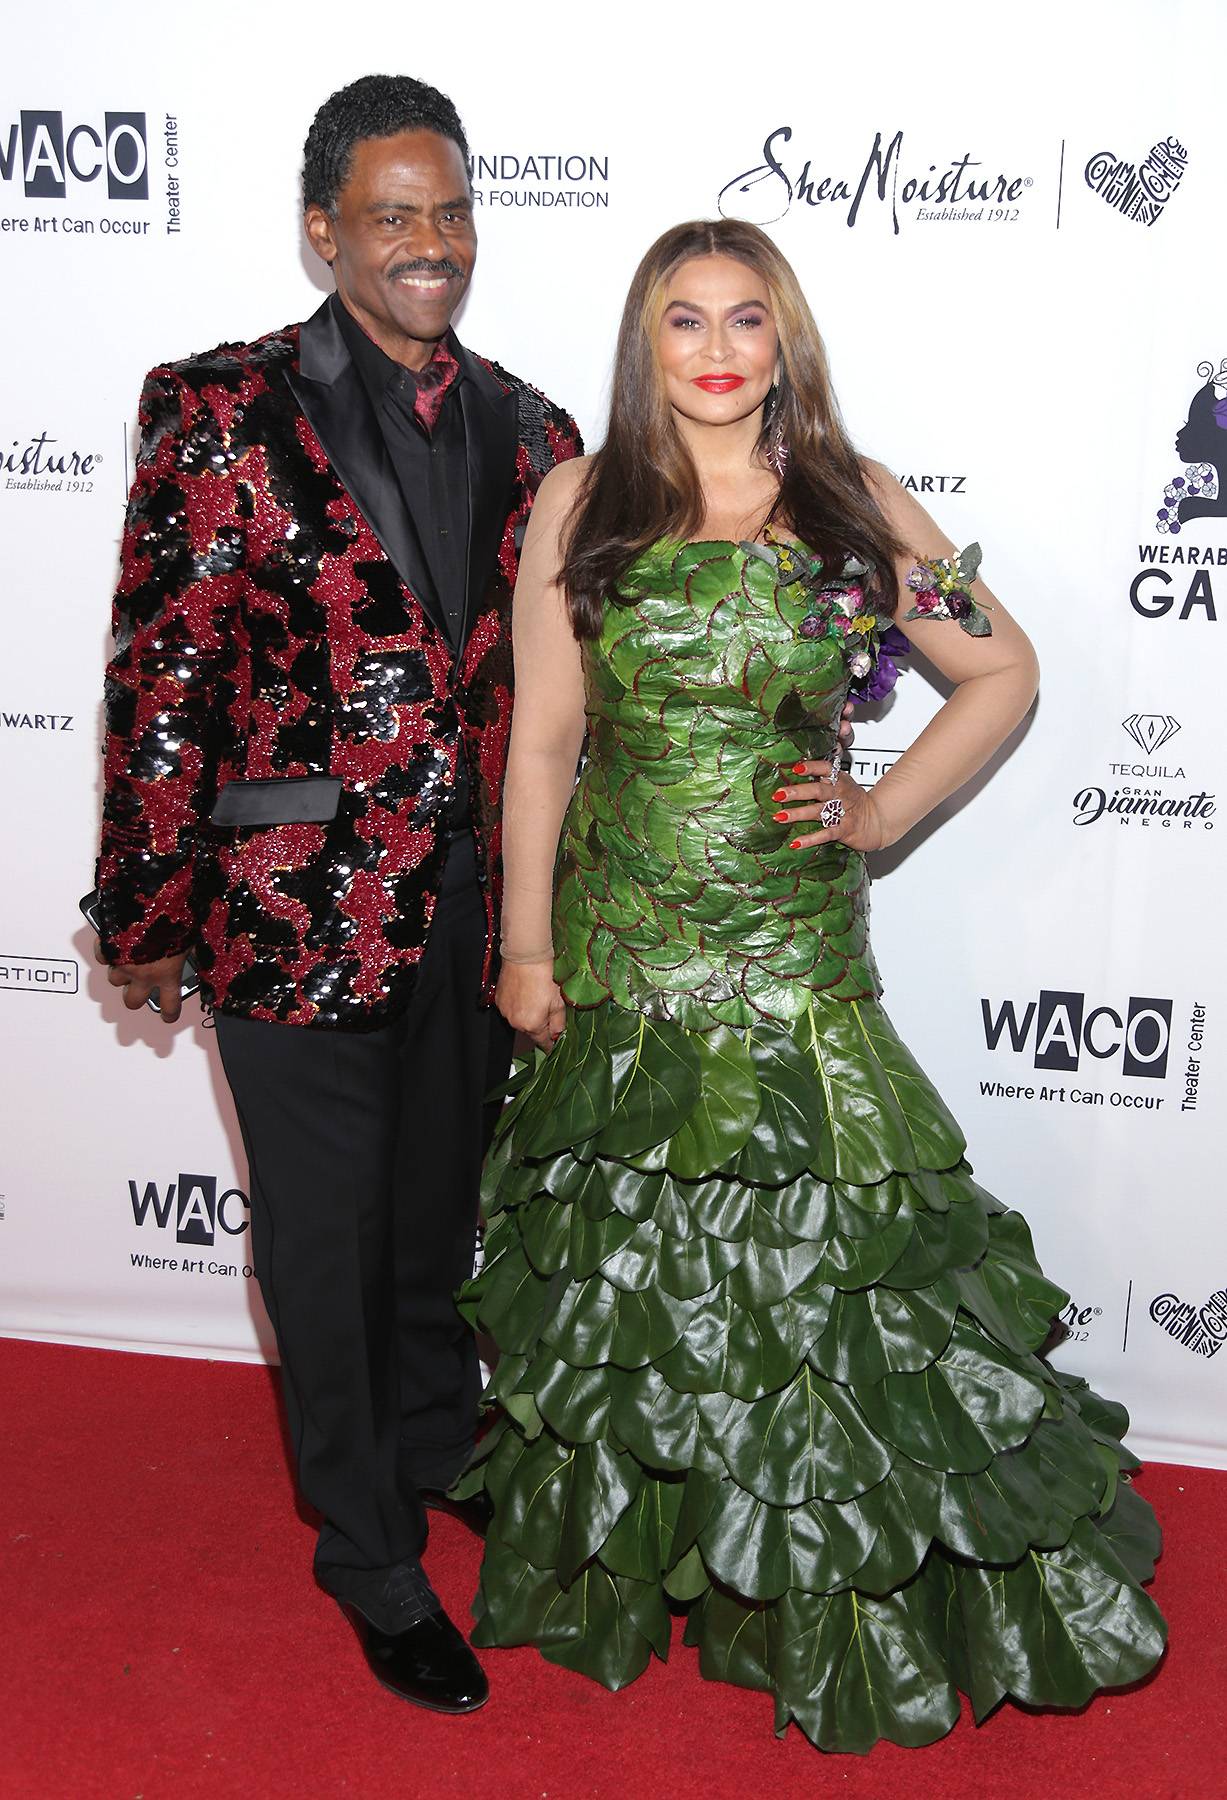 Richard and Tina Lawson - The inaugural Wearable Art Gala was hosted by Tina Lawson on Saturday at California African American Museum in Los Angeles. &quot;$1 million was raised for The WACO Theater Center to benefit young people through their mentorship programs and the arts,&quot; Beyonce, who attended the event, wrote on Instagram. Other guests included Kelly Rowland, Yara Shahidi, Kris Jenner, Bianca Lawson and Solange. Flip through to see all their ornate looks.&nbsp;(Photo: Jerritt Clark/WireImage)